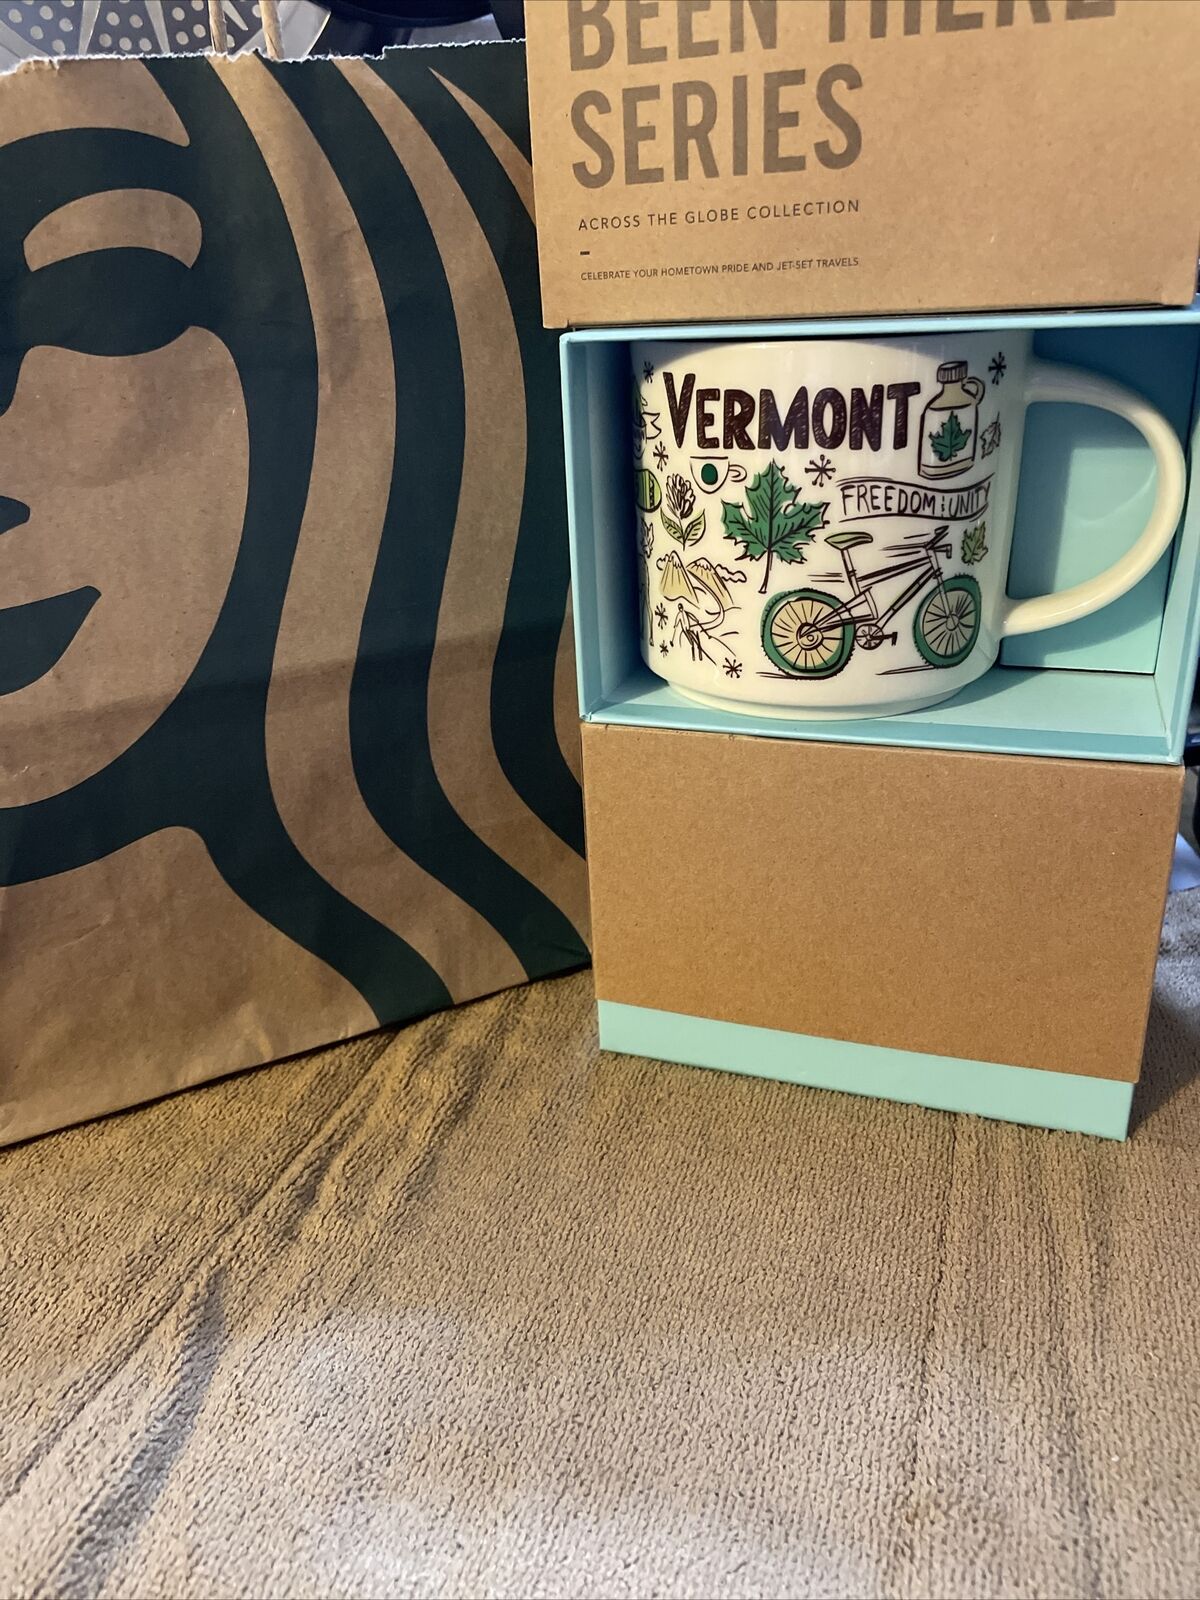 Starbucks Coffee Mug Been There Series Vermont VT Collectible Ceramic Cup Tea